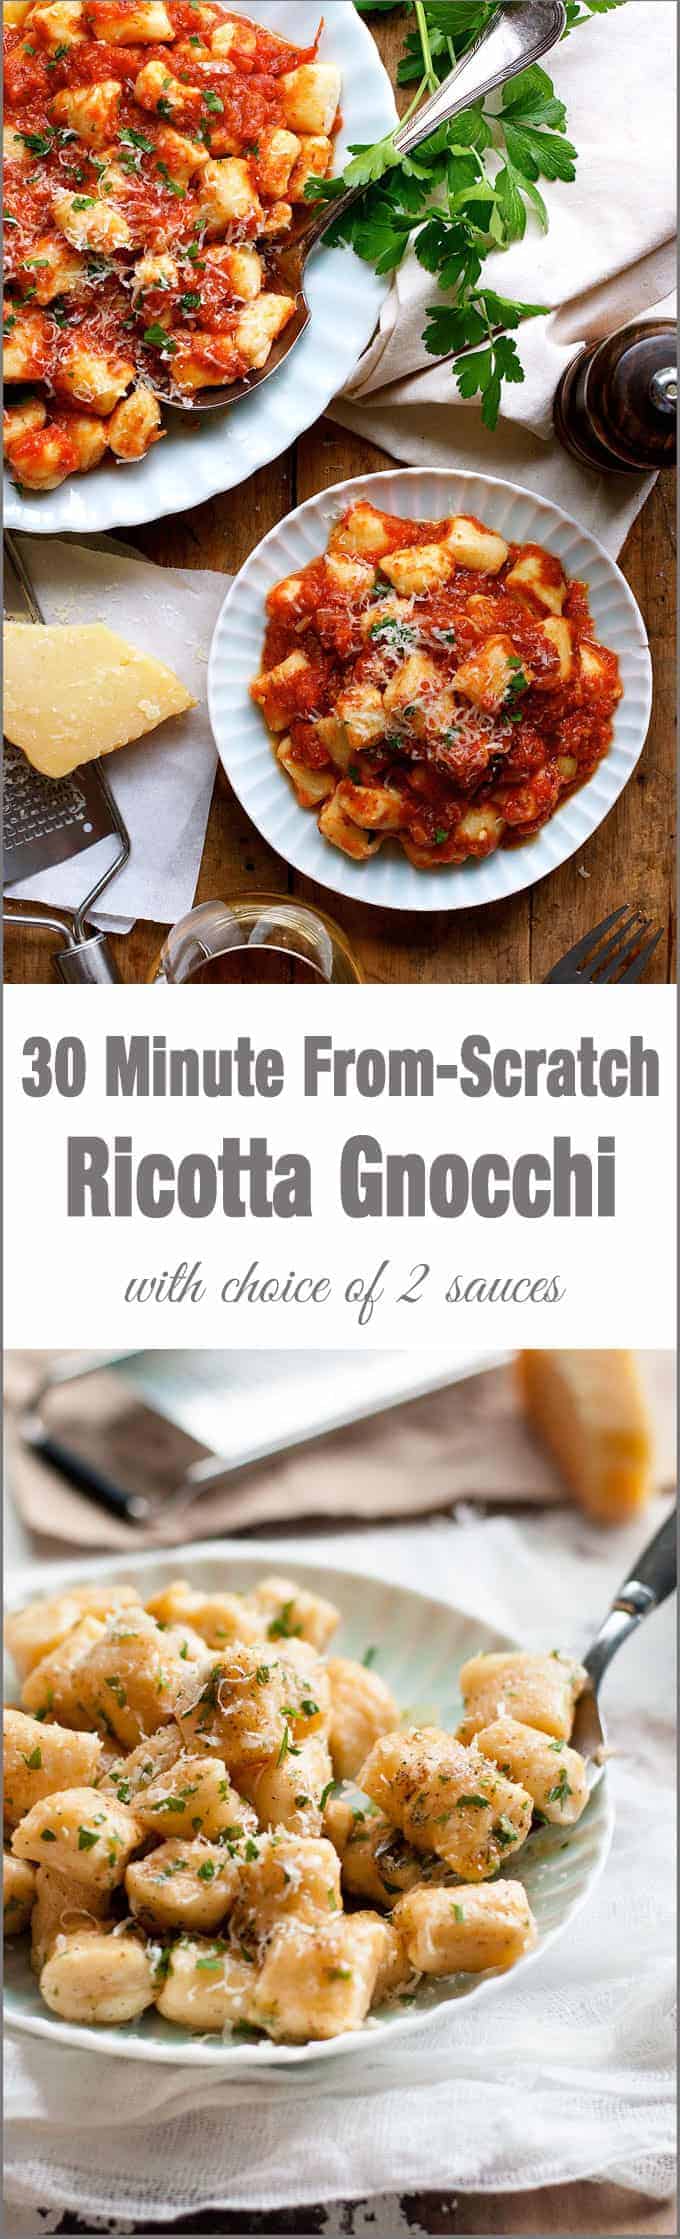 30 Minute Homemade Ricotta Gnocchi - made from scratch in 30 minutes! So easy to make, and no special equipment required. Serve with a tomato sauce or browned butter - your choice!